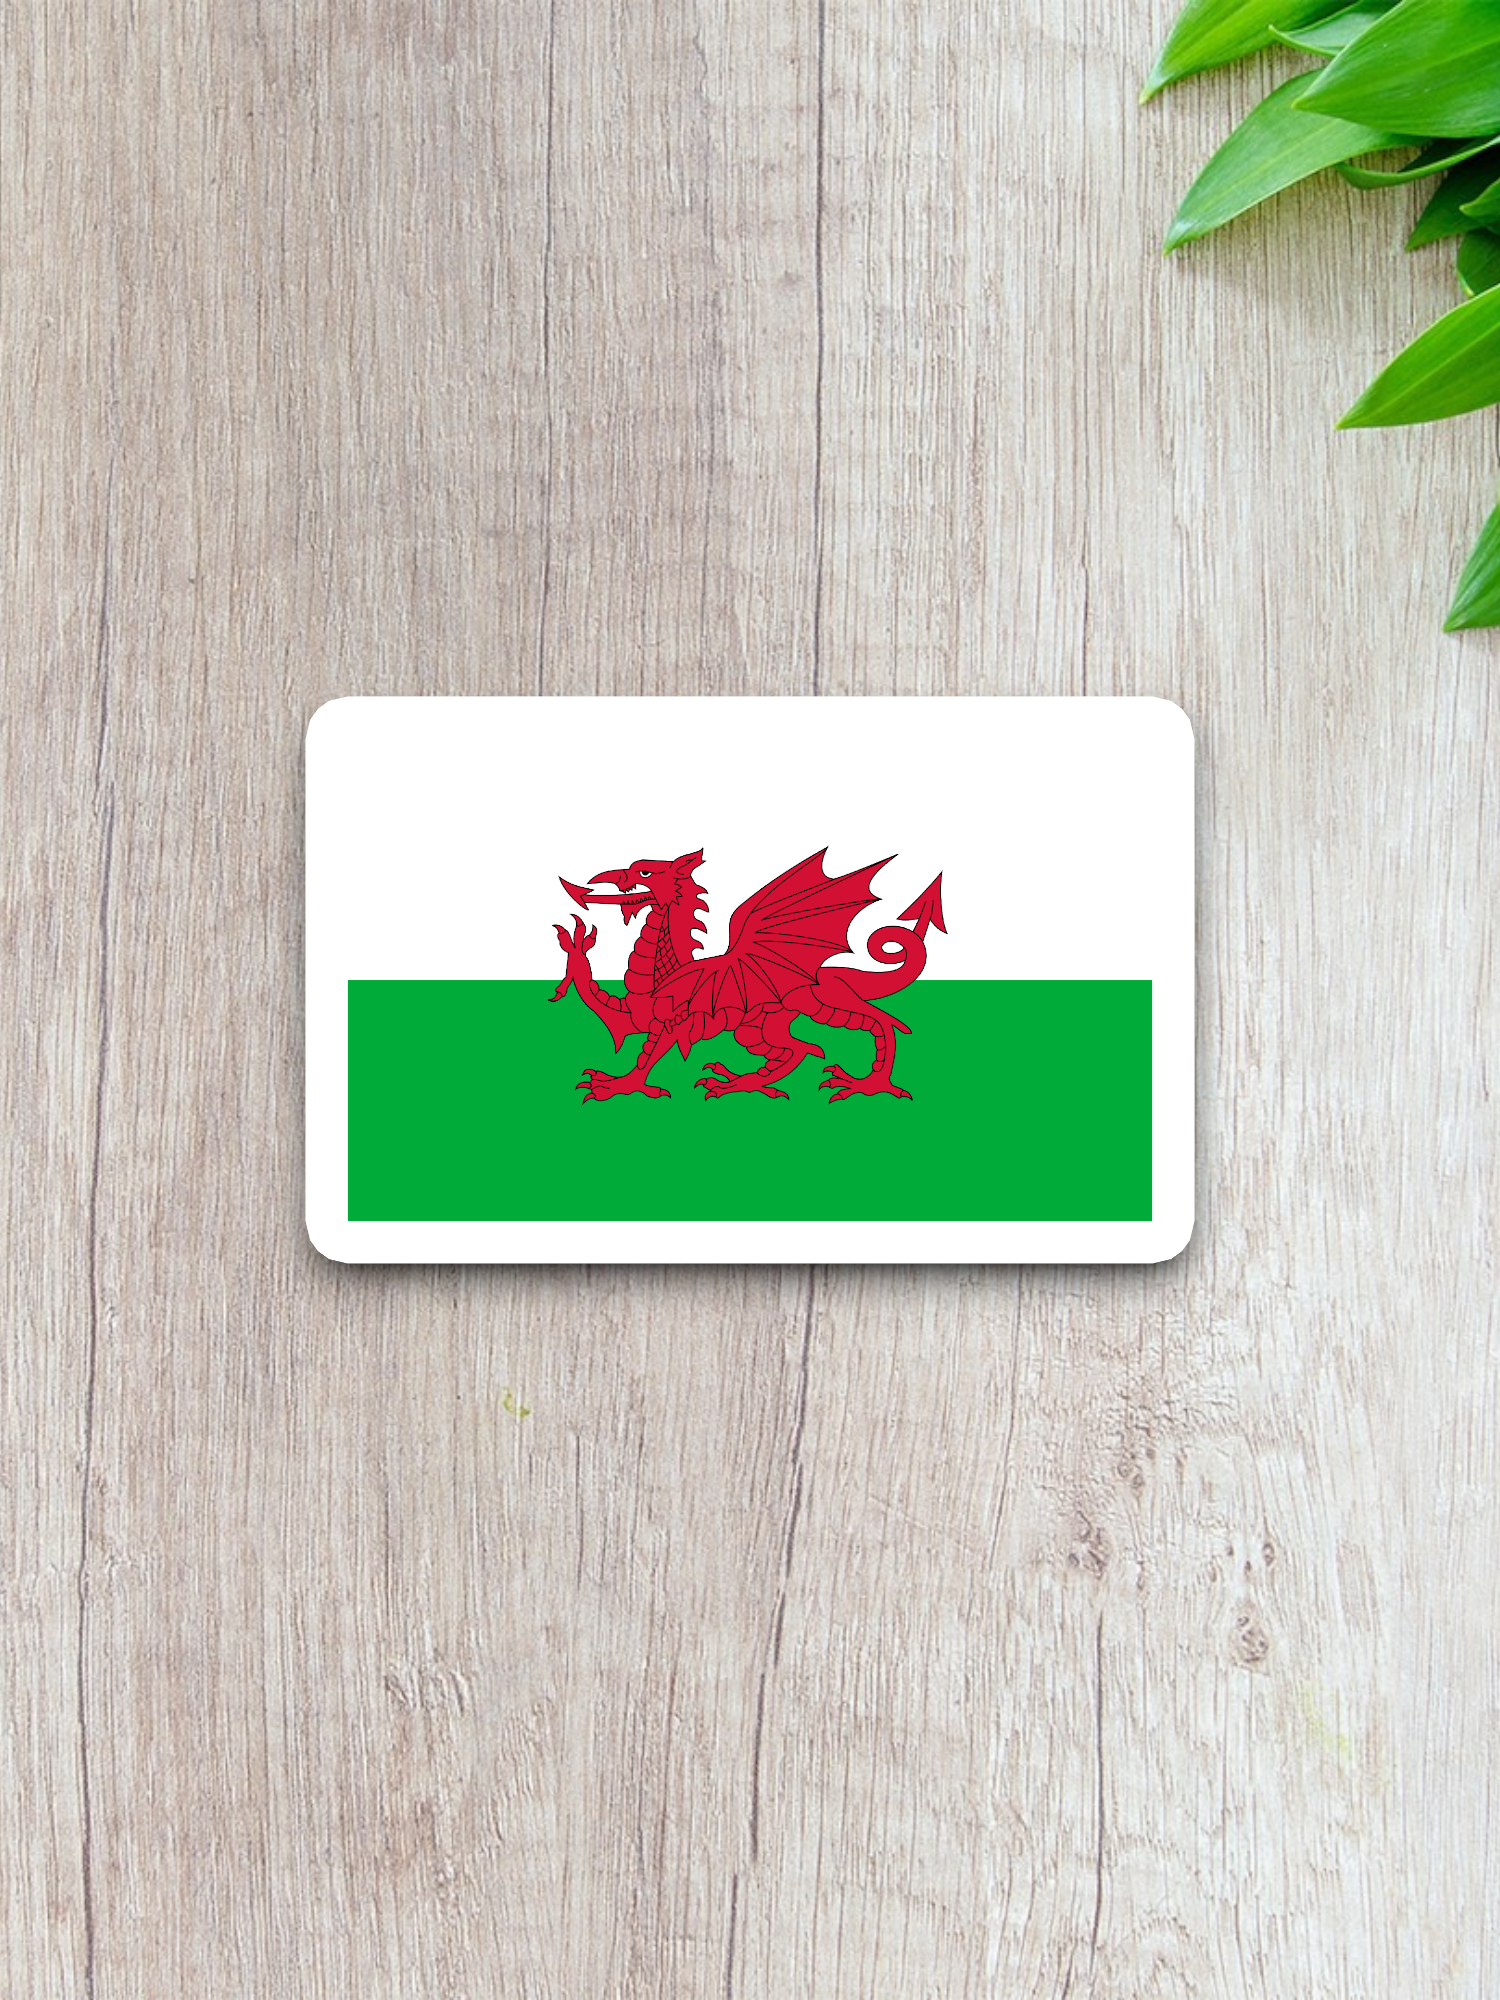 Wales Flag - International Country Flag Sticker